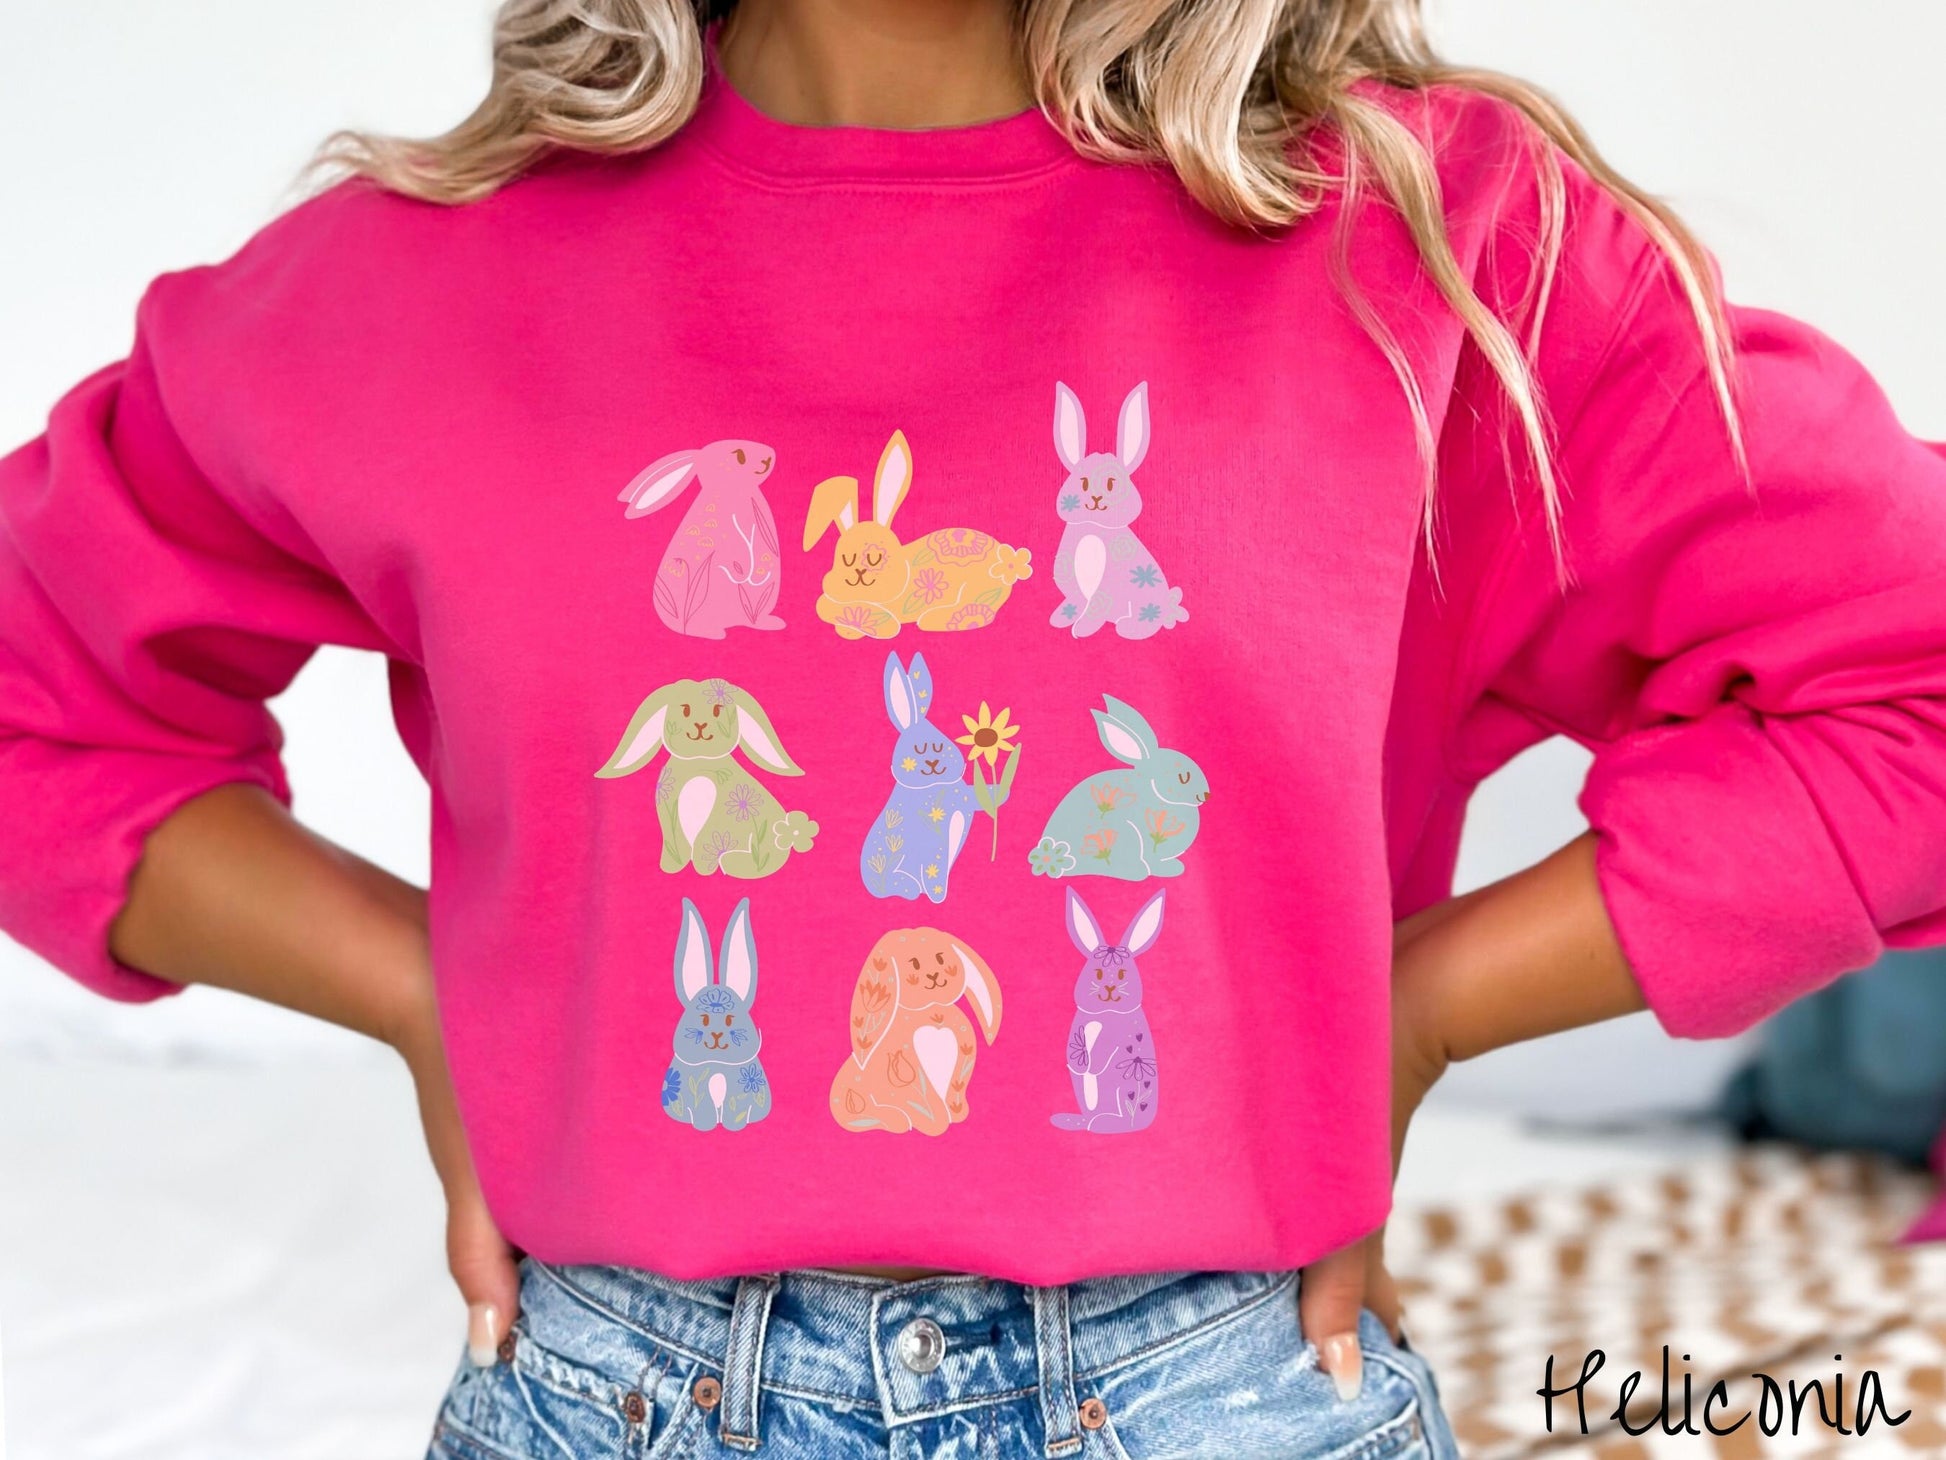 A woman wearing a cute, vintage heliconia colored sweatshirt with a three by three grid of colorful bunny rabbits. They are from left to right pink, yellow, purple, green, blue, seafoam, light blue, orange, and purple with flowers near them.